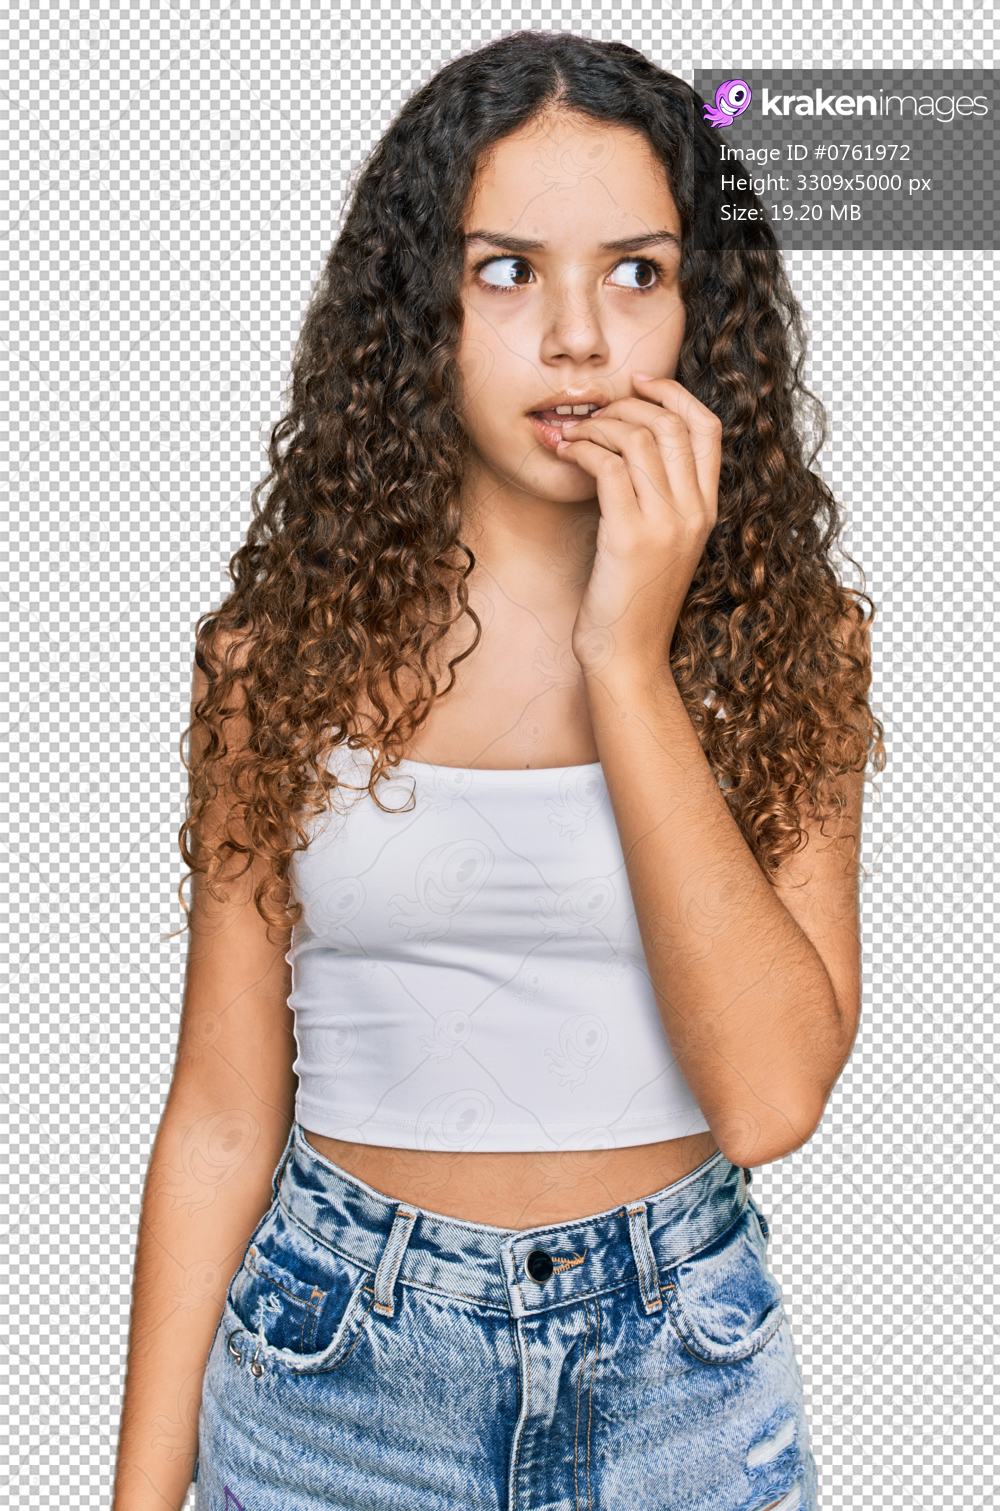 Teenager hispanic girl wearing casual clothes looking stressed and nervous with hands on mouth biting nails. anxiety problem.